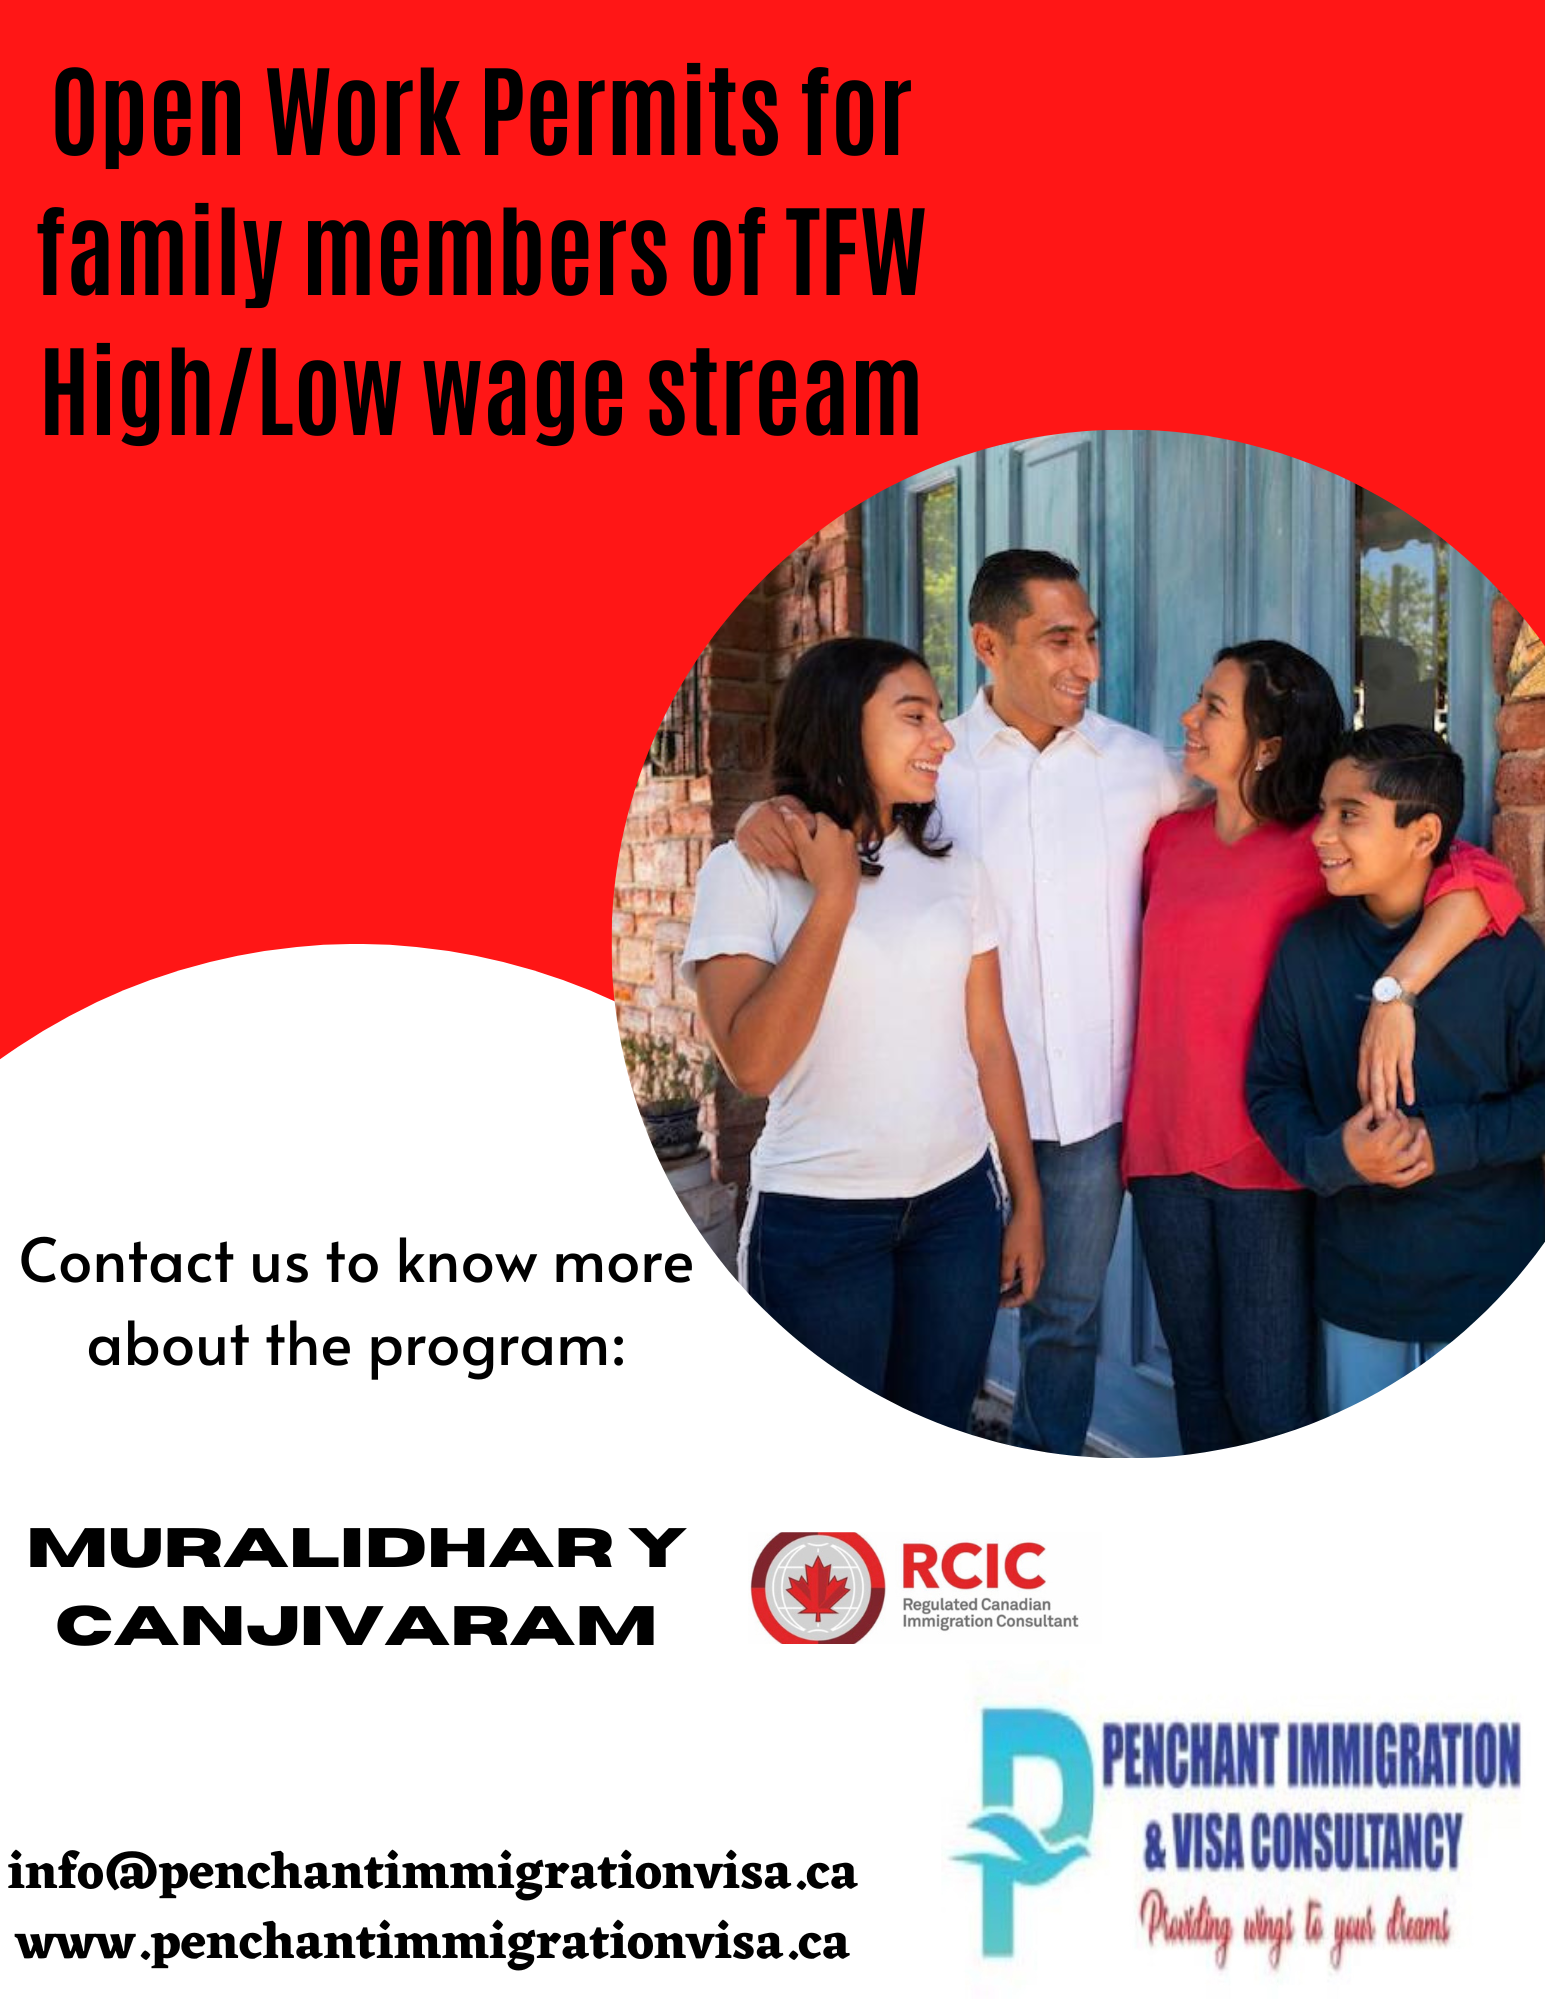 IRCC announces family work permits for High/low wage TFW’s